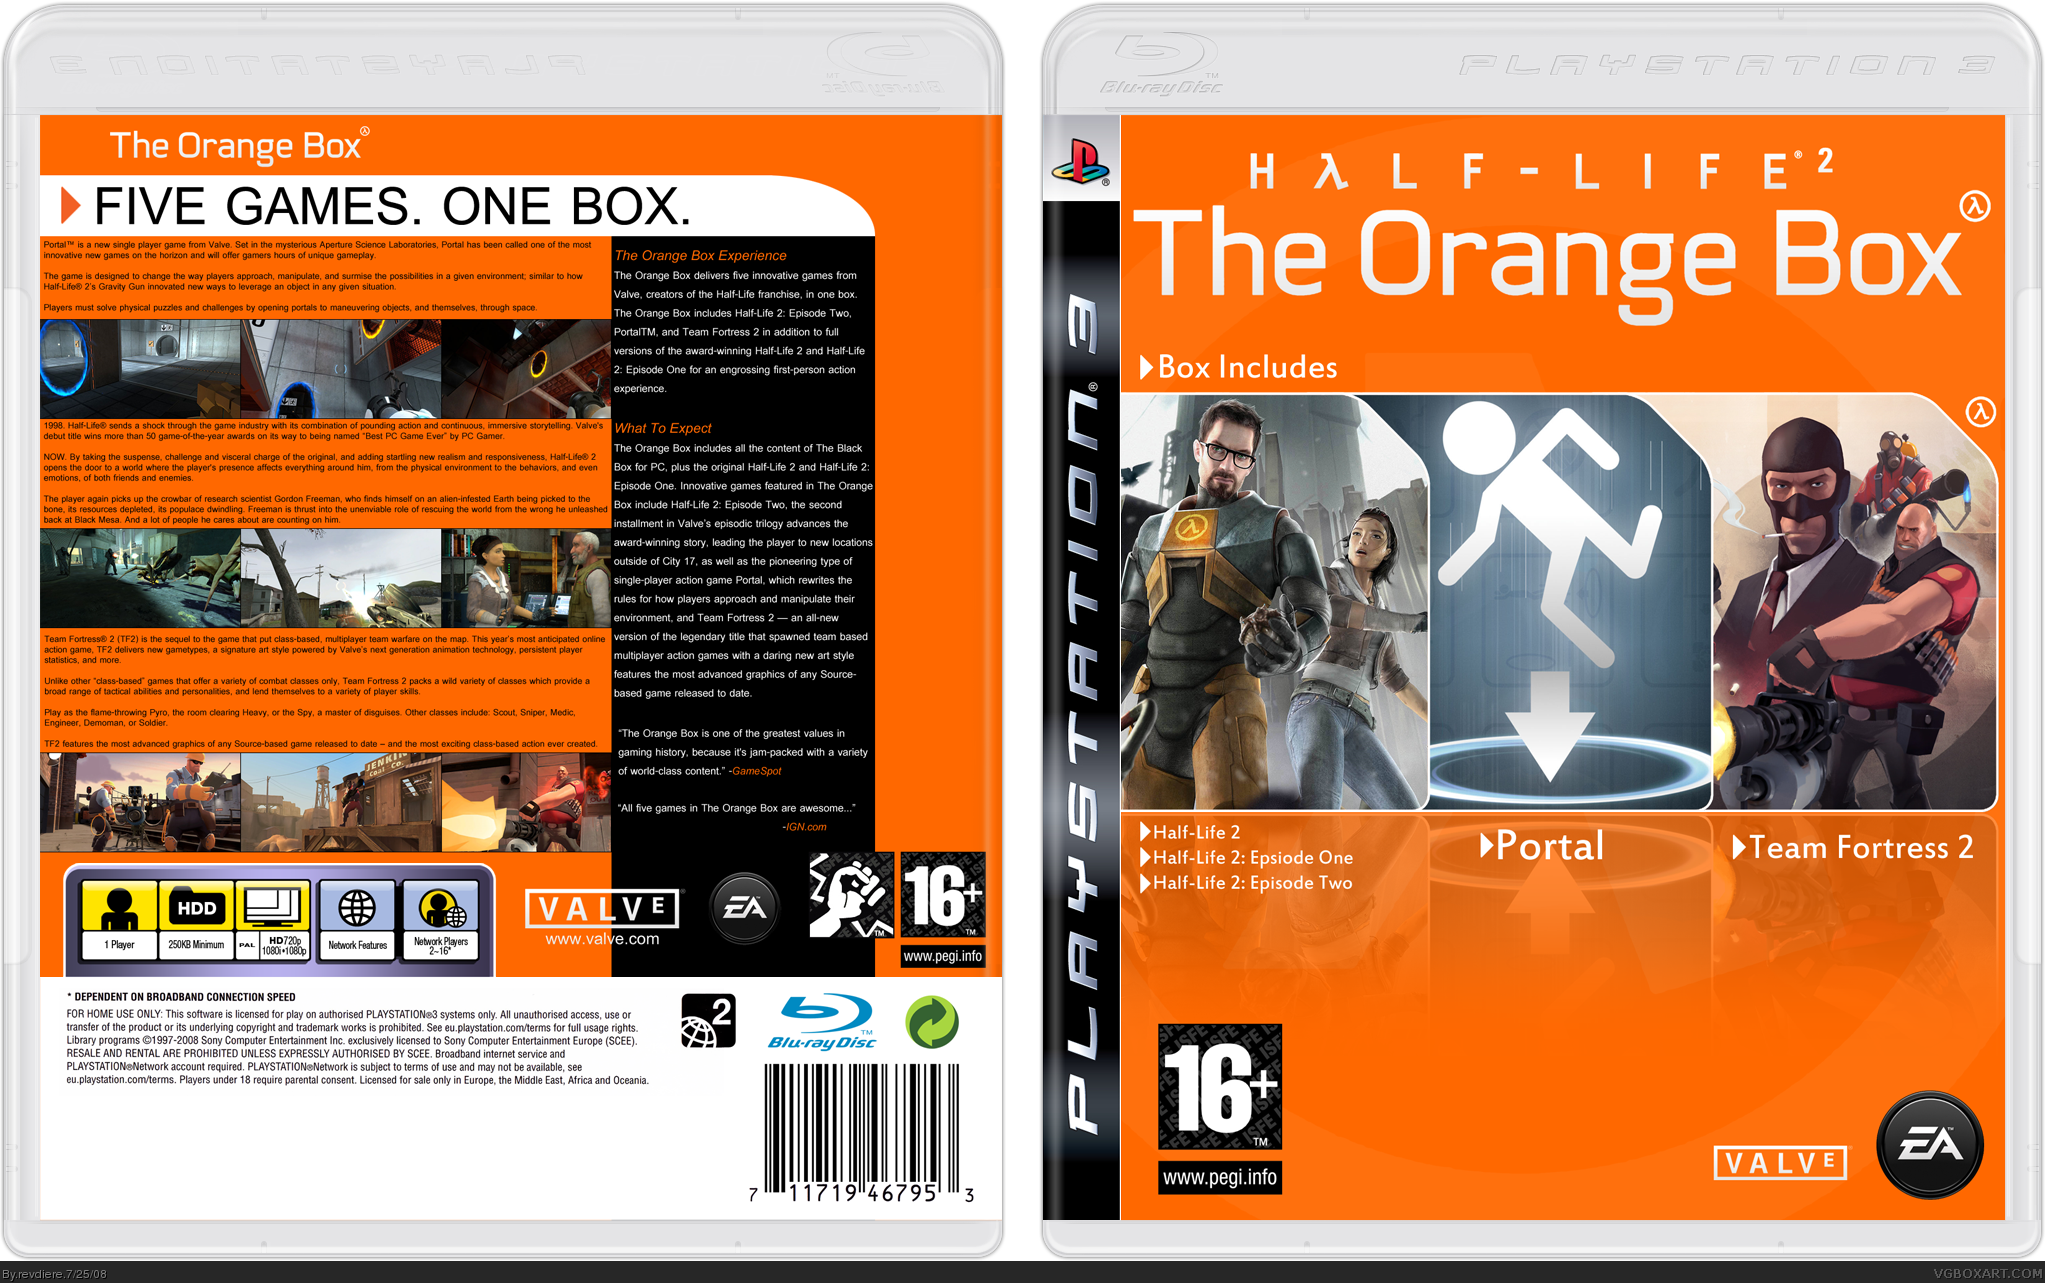 Viewing full size The Orange Box box cover by revdiere [ Back ]